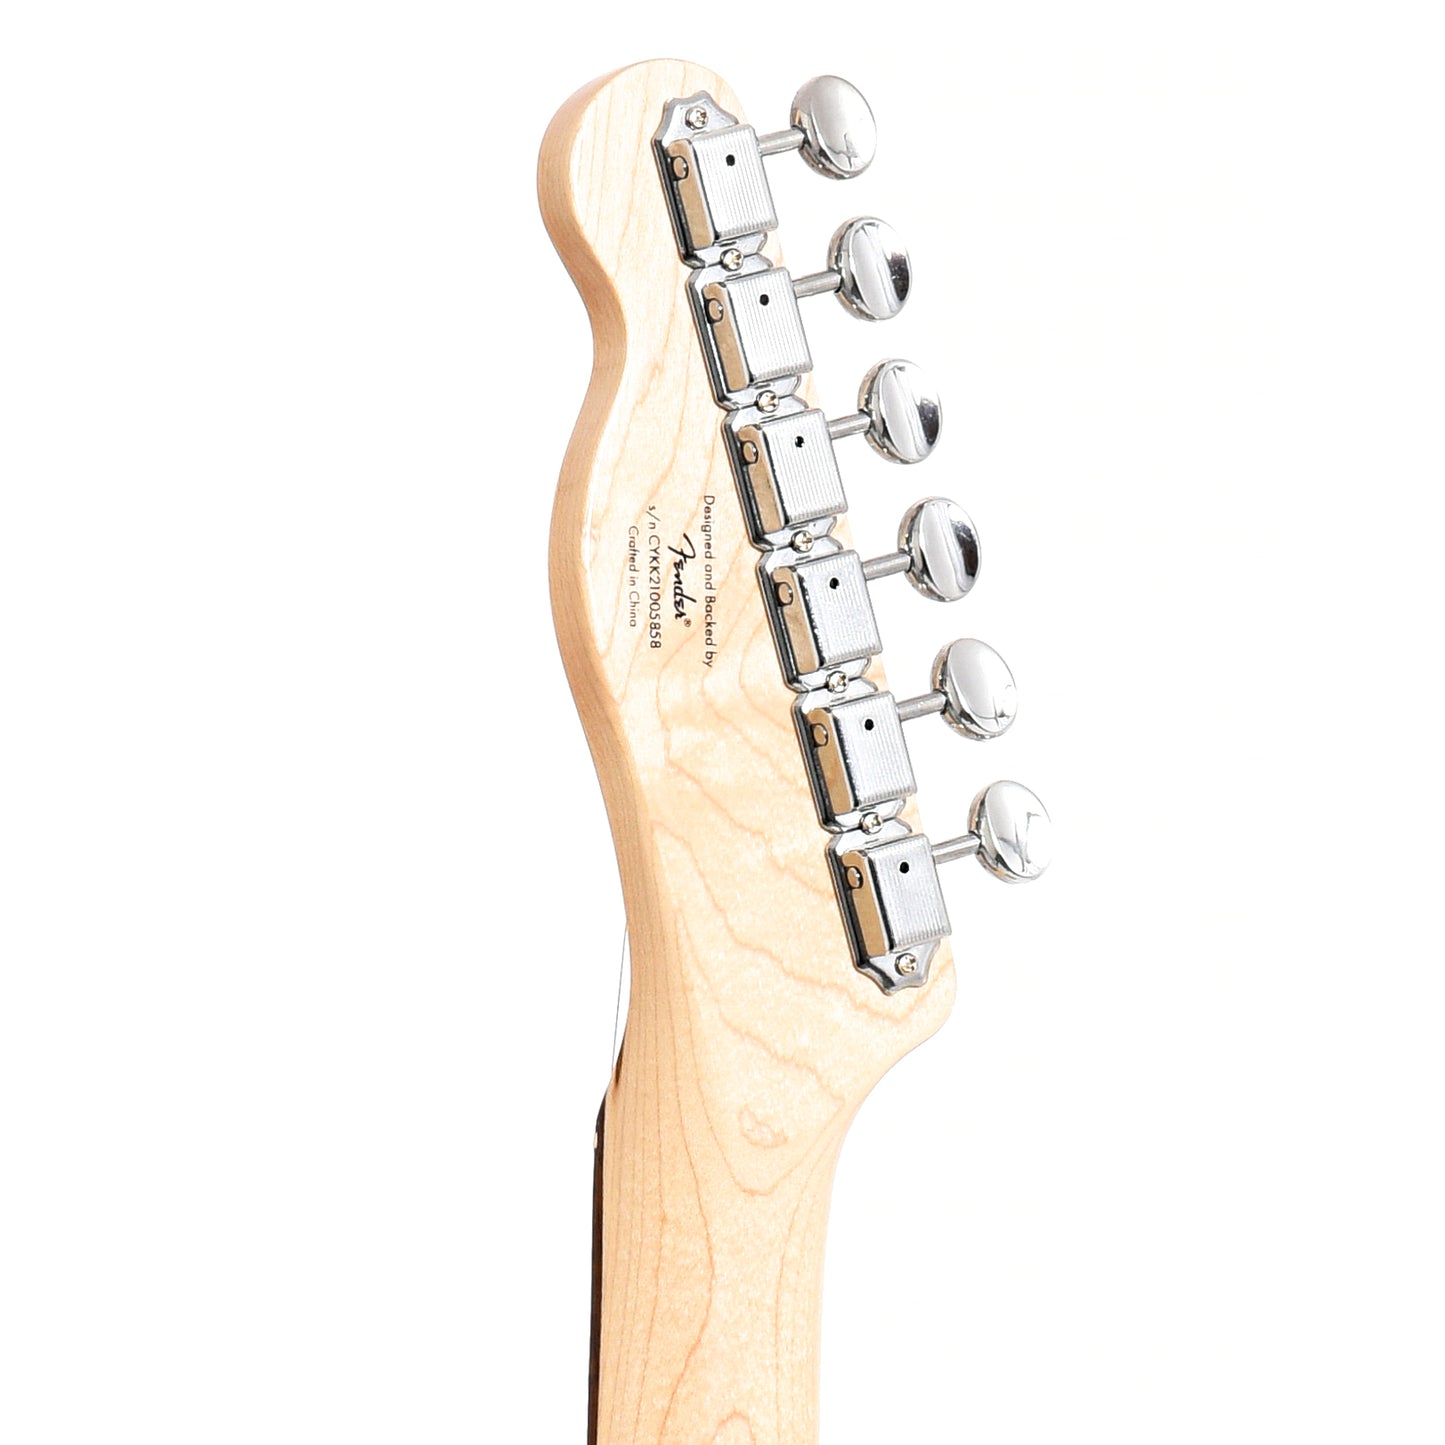 Image 8 of Squier Paranormal Baritone Cabronita Telecaster, 3-Color Sunburst - SKU# SPBARICT-3TS : Product Type Other : Elderly Instruments